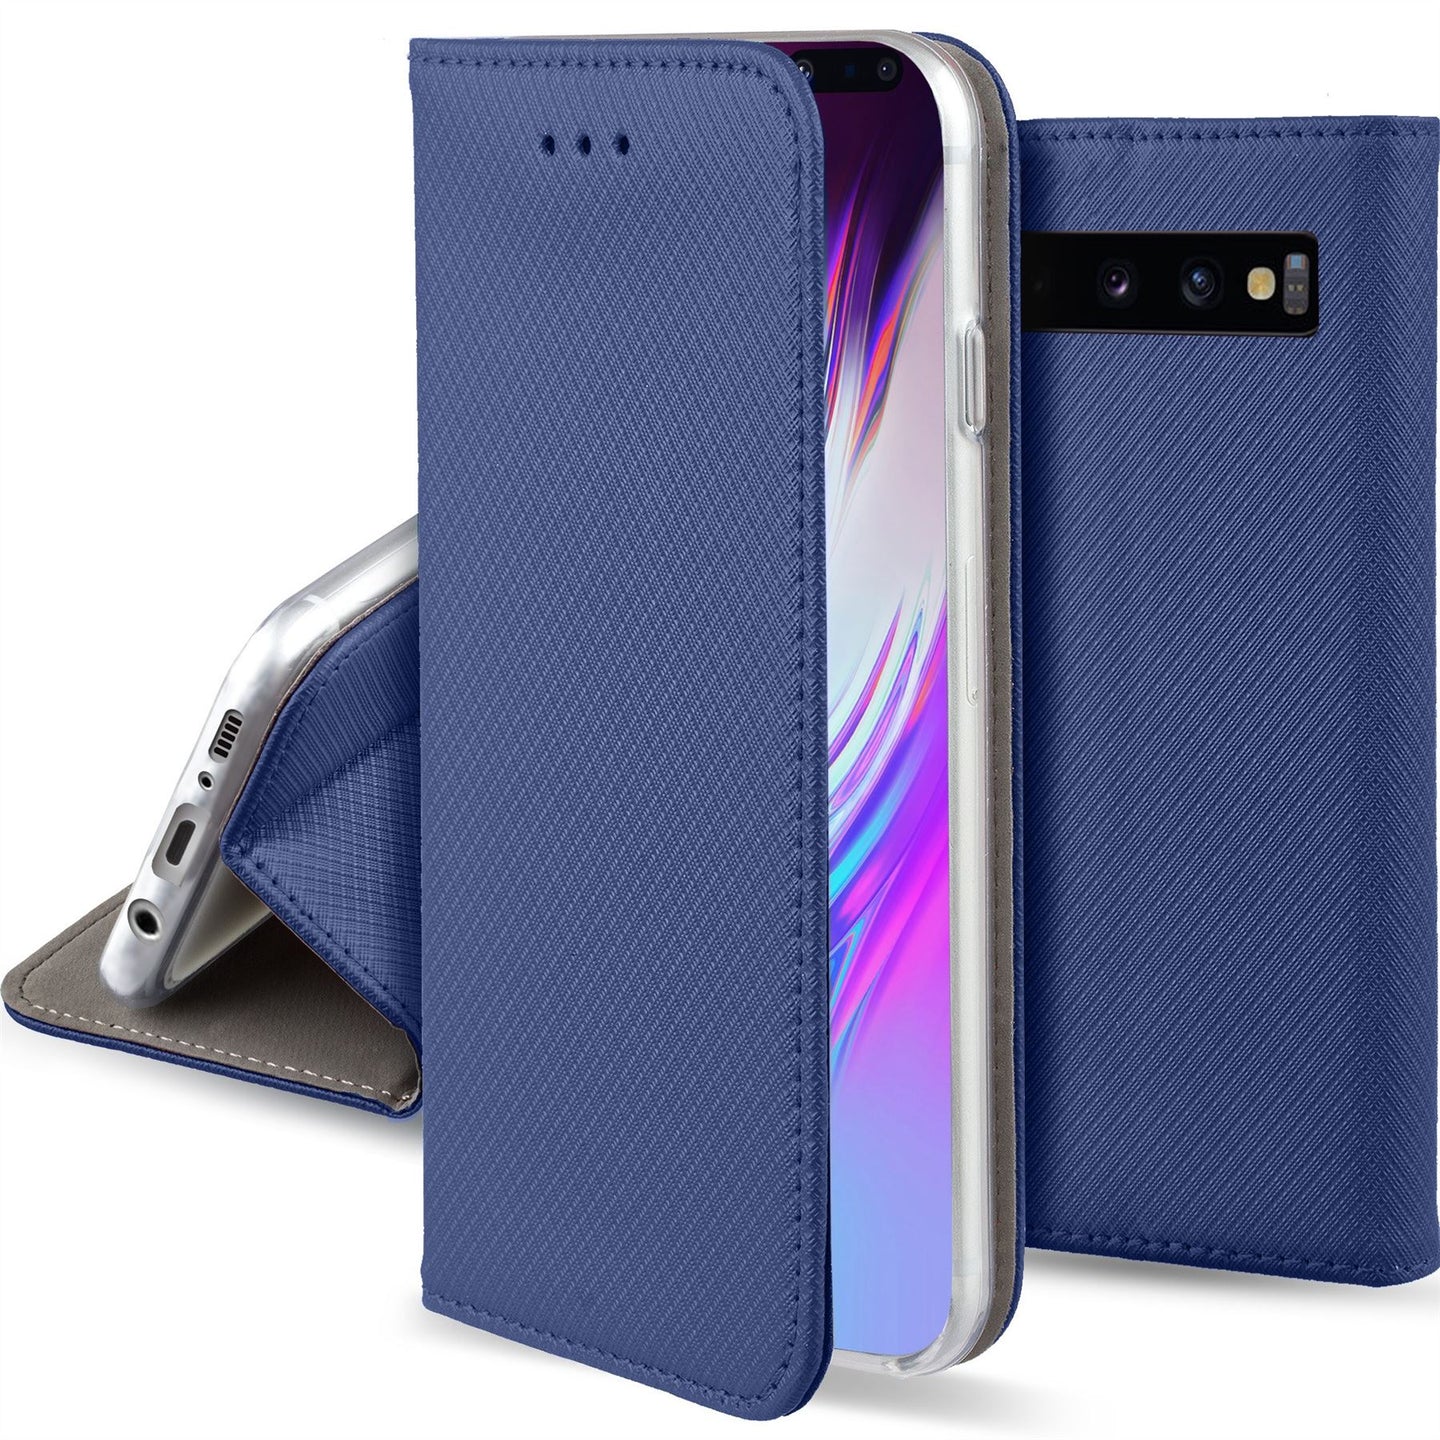 Moozy Case Flip Cover for Samsung S10 Plus, Dark Blue - Smart Magnetic Flip Case with Card Holder and Stand